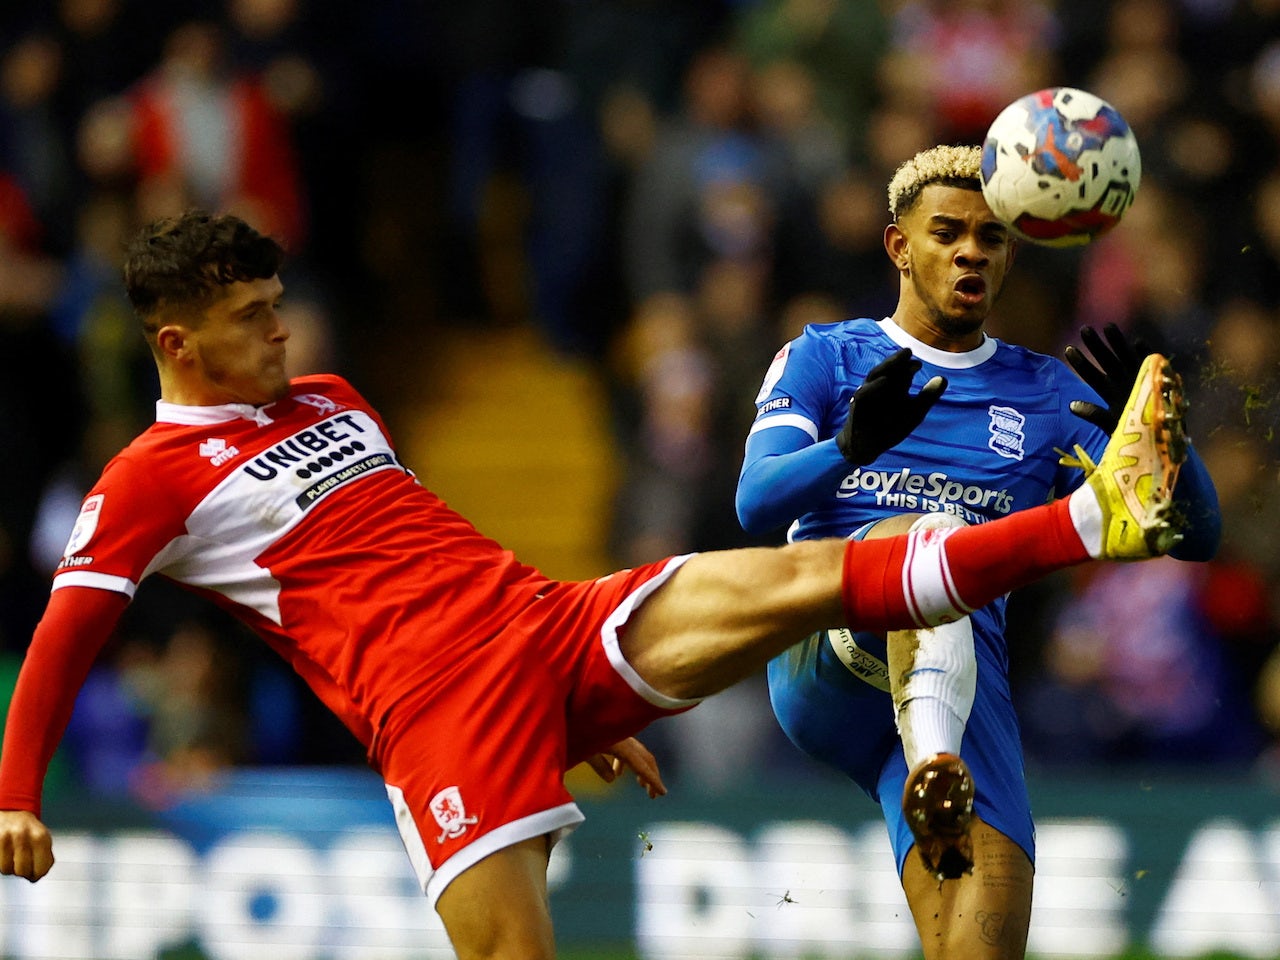 Where the win over Cardiff leaves Birmingham City in the